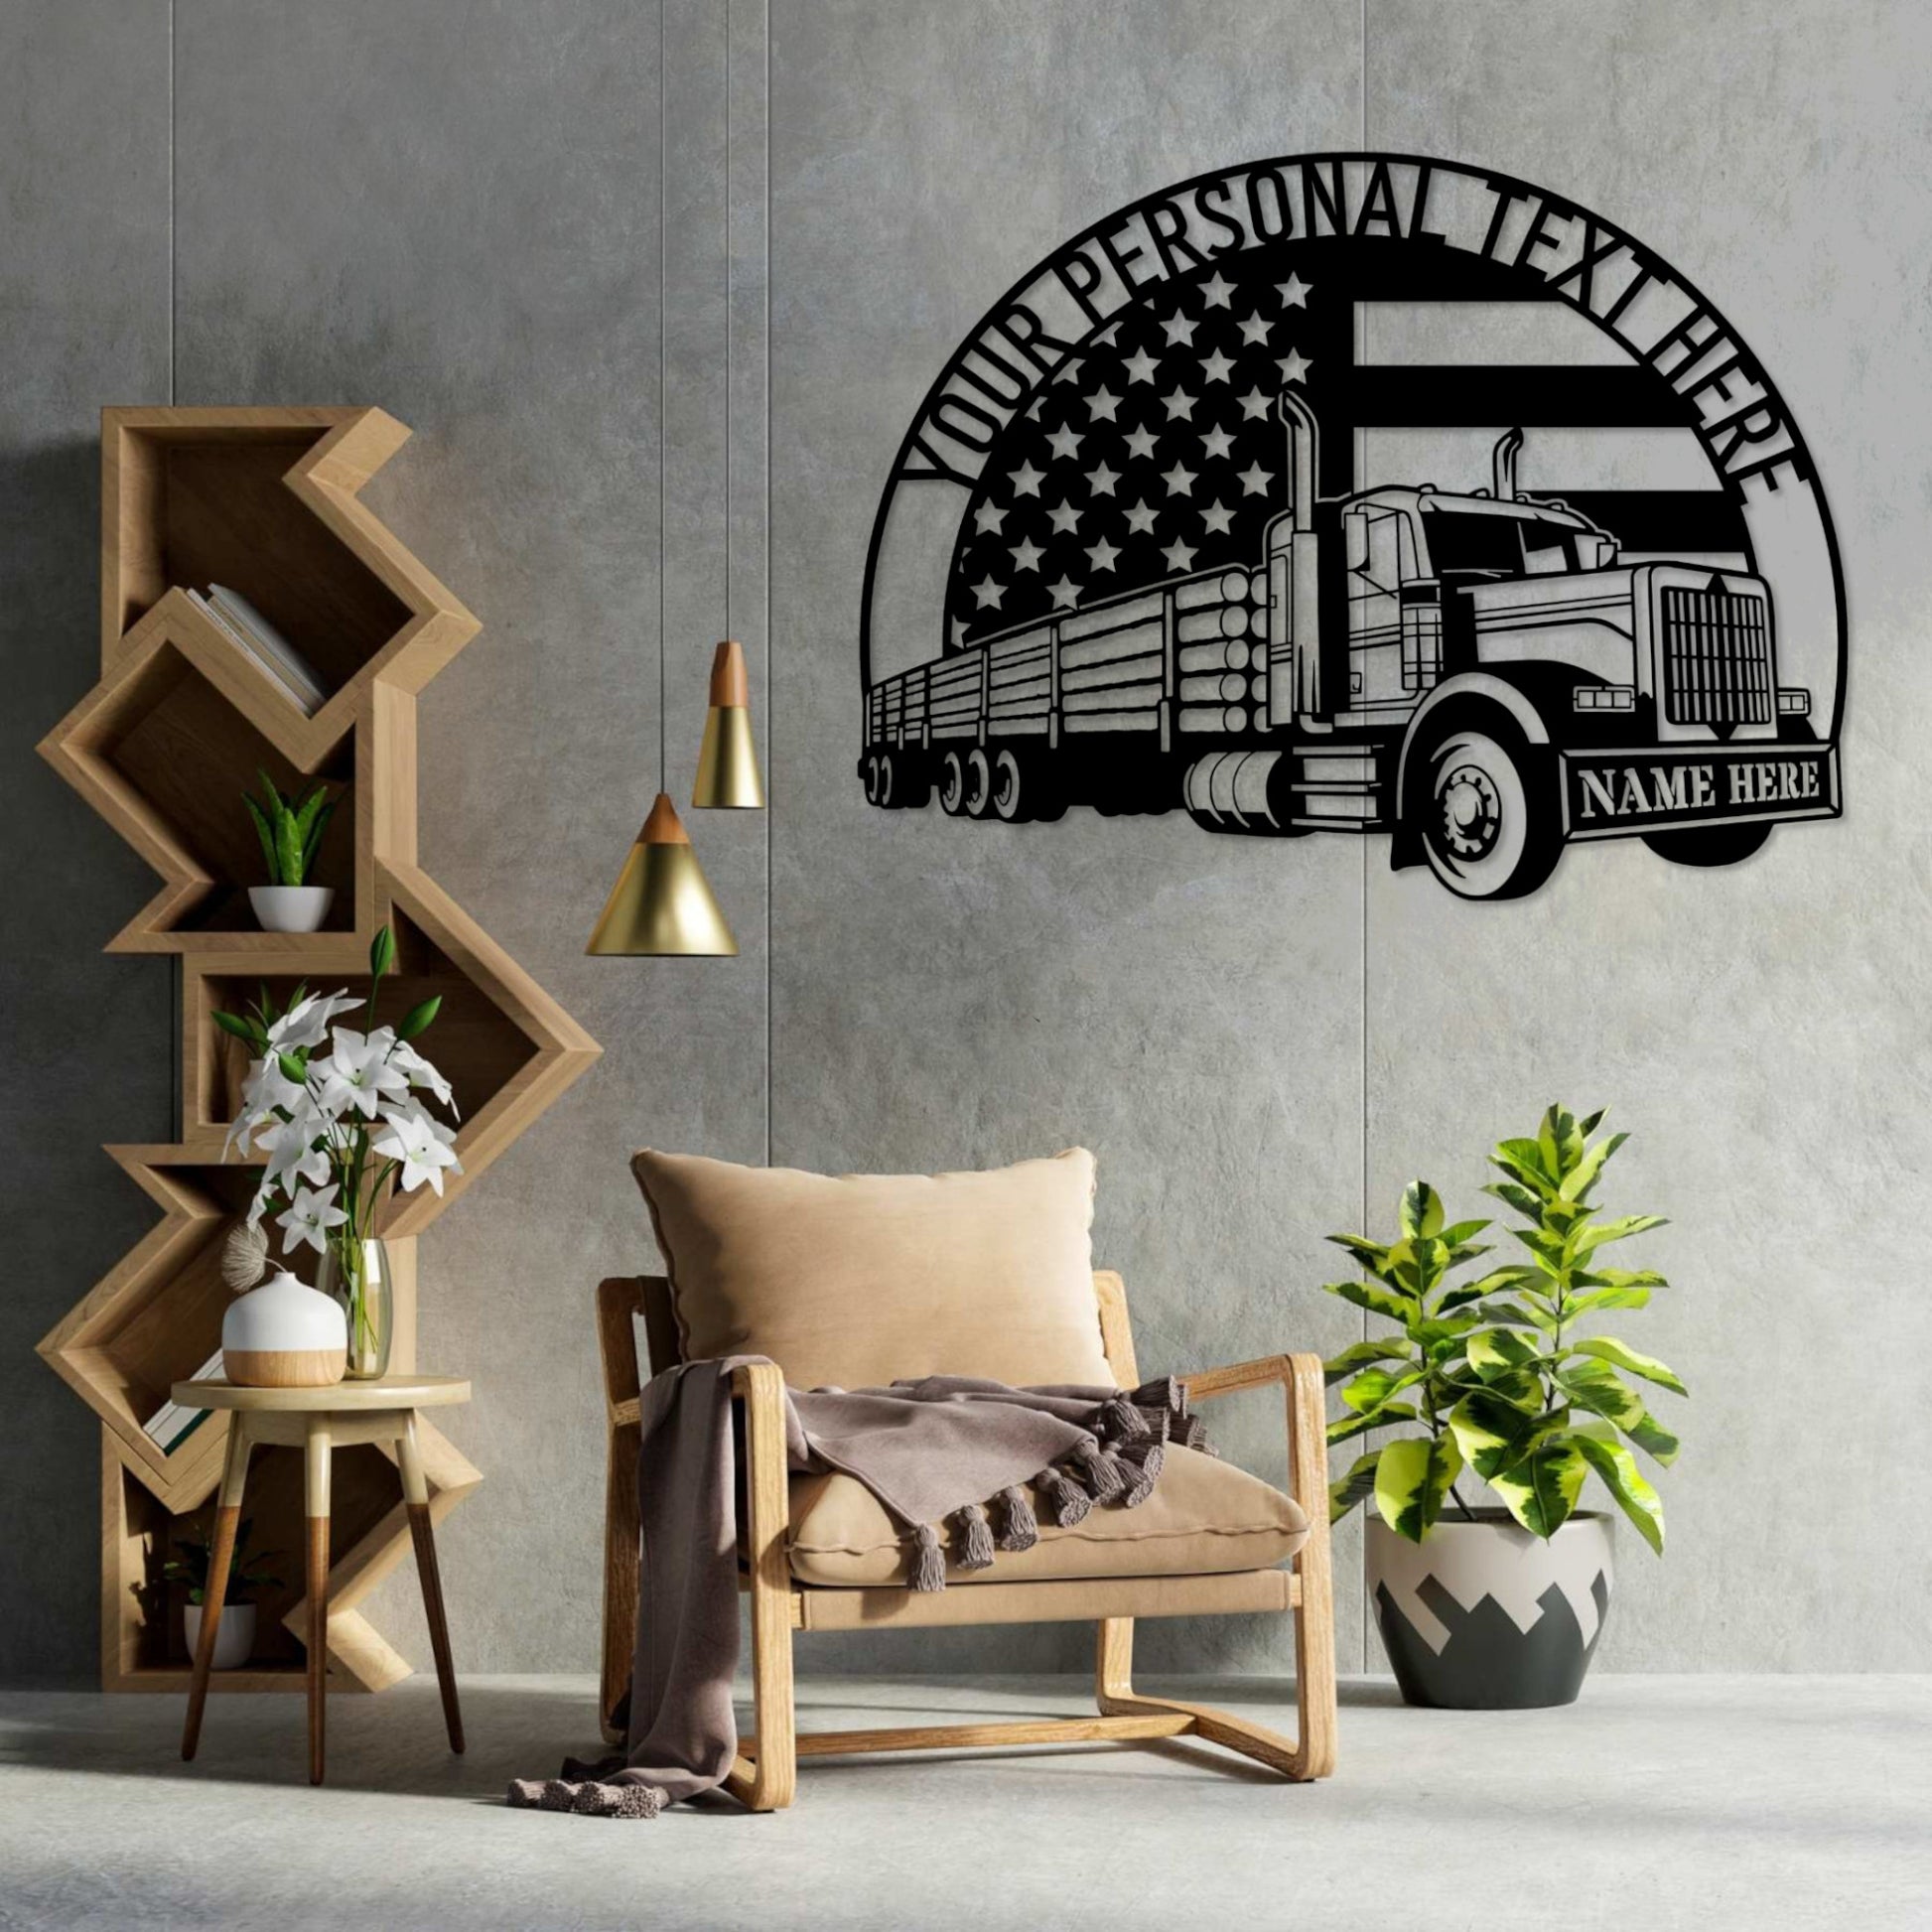 Personalized Logging Truck Name Metal Sign. Custom Timber Lorry Wall Decor. Patriotic Woodworker Gift. American Logger. Truck Driver Decor